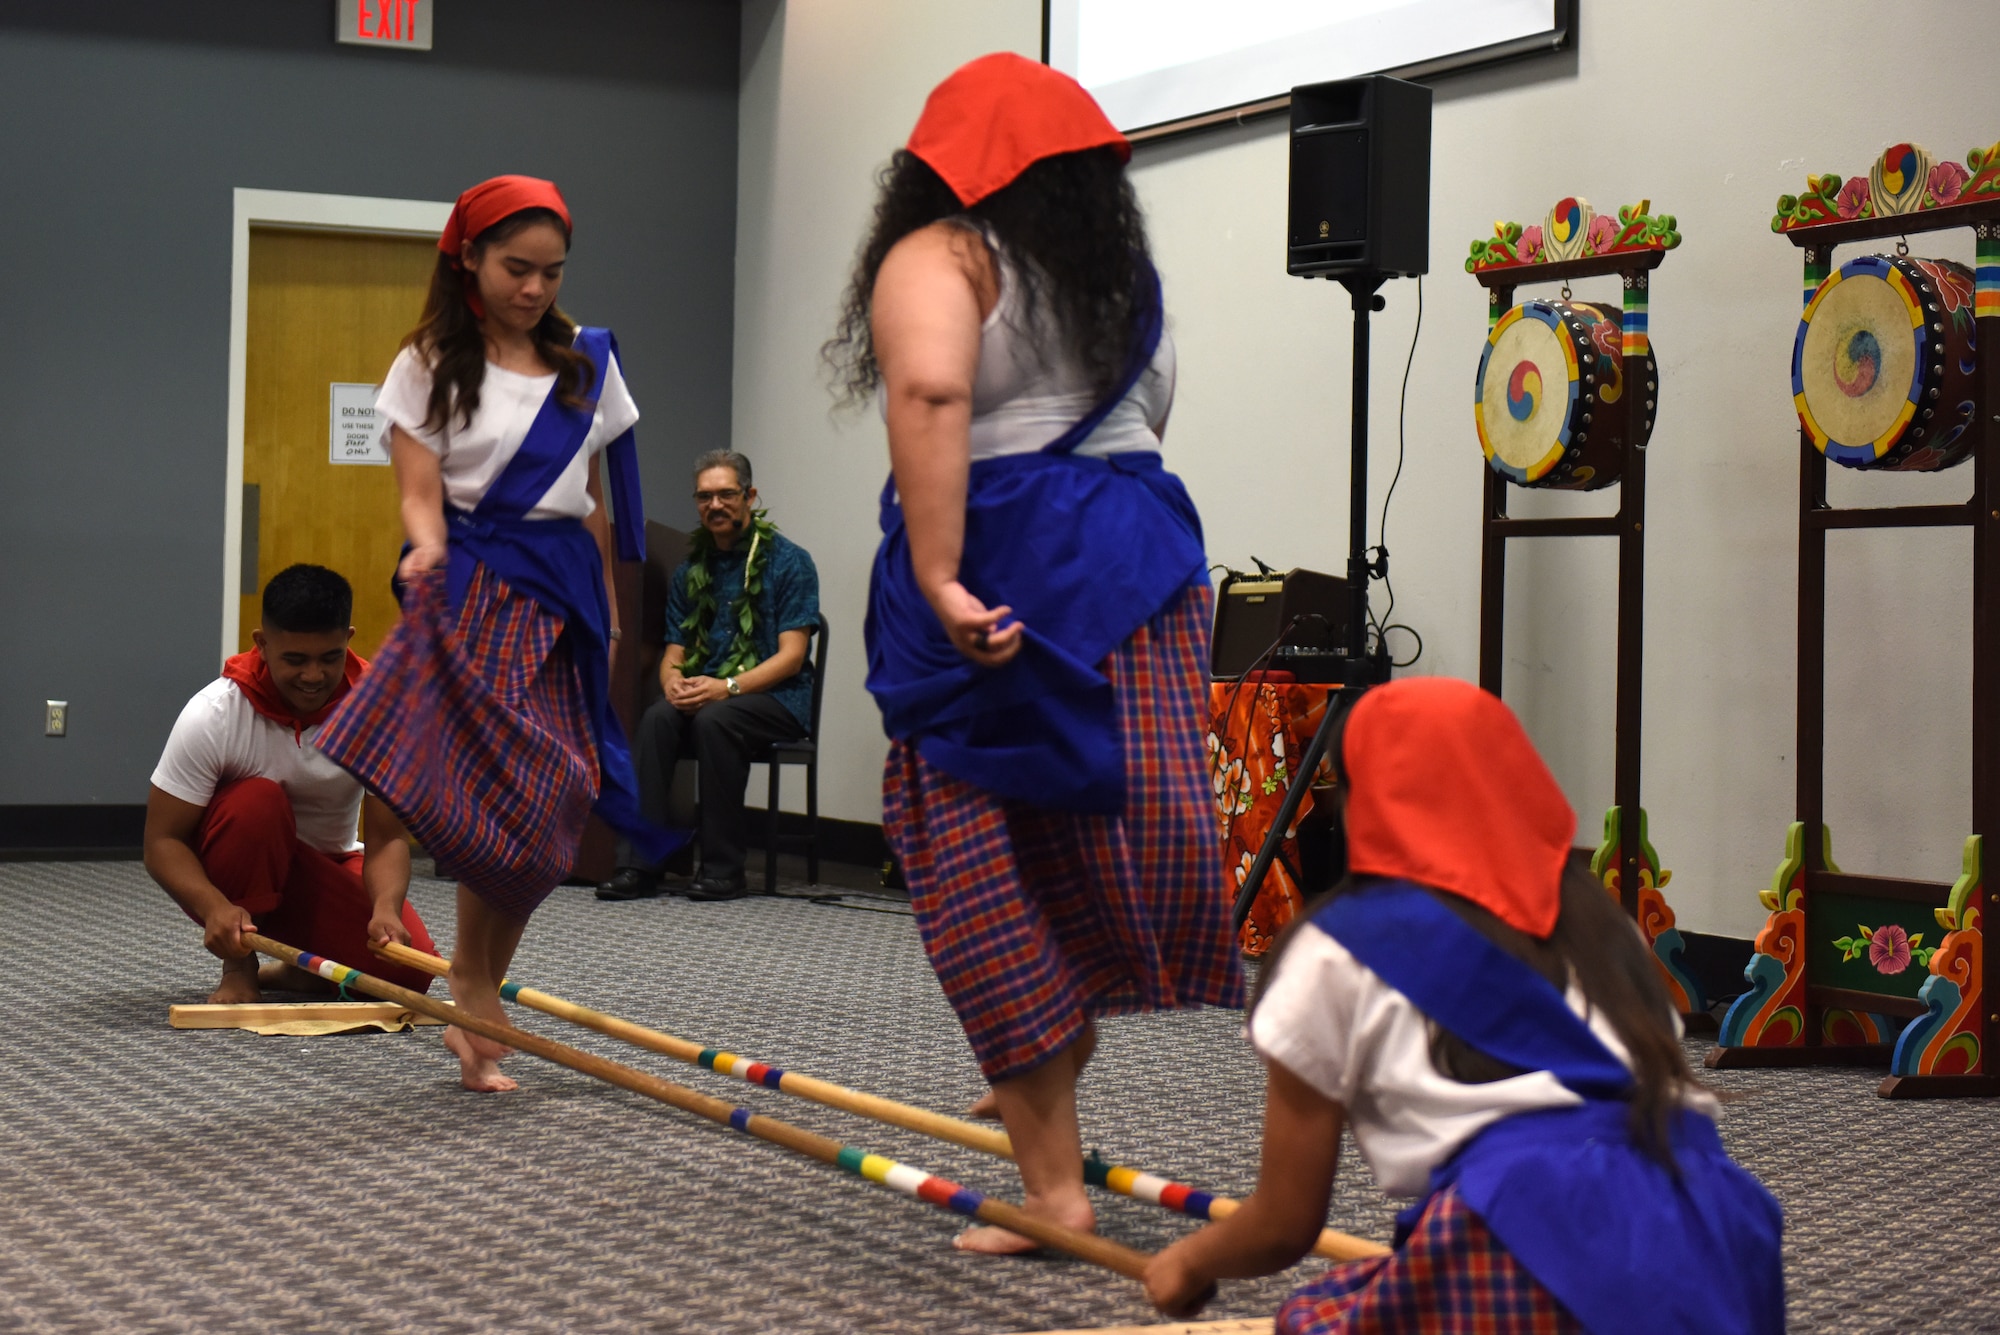 Performers at the Asian American Pacific Islander Heritage Month Culture Event demonstrate a Filipino dance “Tinikling” at the event Center on Goodfellow Air Force Base, Texas, May 22, 2019. “Tinikling” originated during the Spanish occupation in the Philippines, where rice farmers on Visayan Islands usually set up bamboo traps to protect their fields, yet birds dodged their traps, the dance steps imitate the bird’s movements. (U.S. Air Force photo by Senior Airman Seraiah Hines/Released)